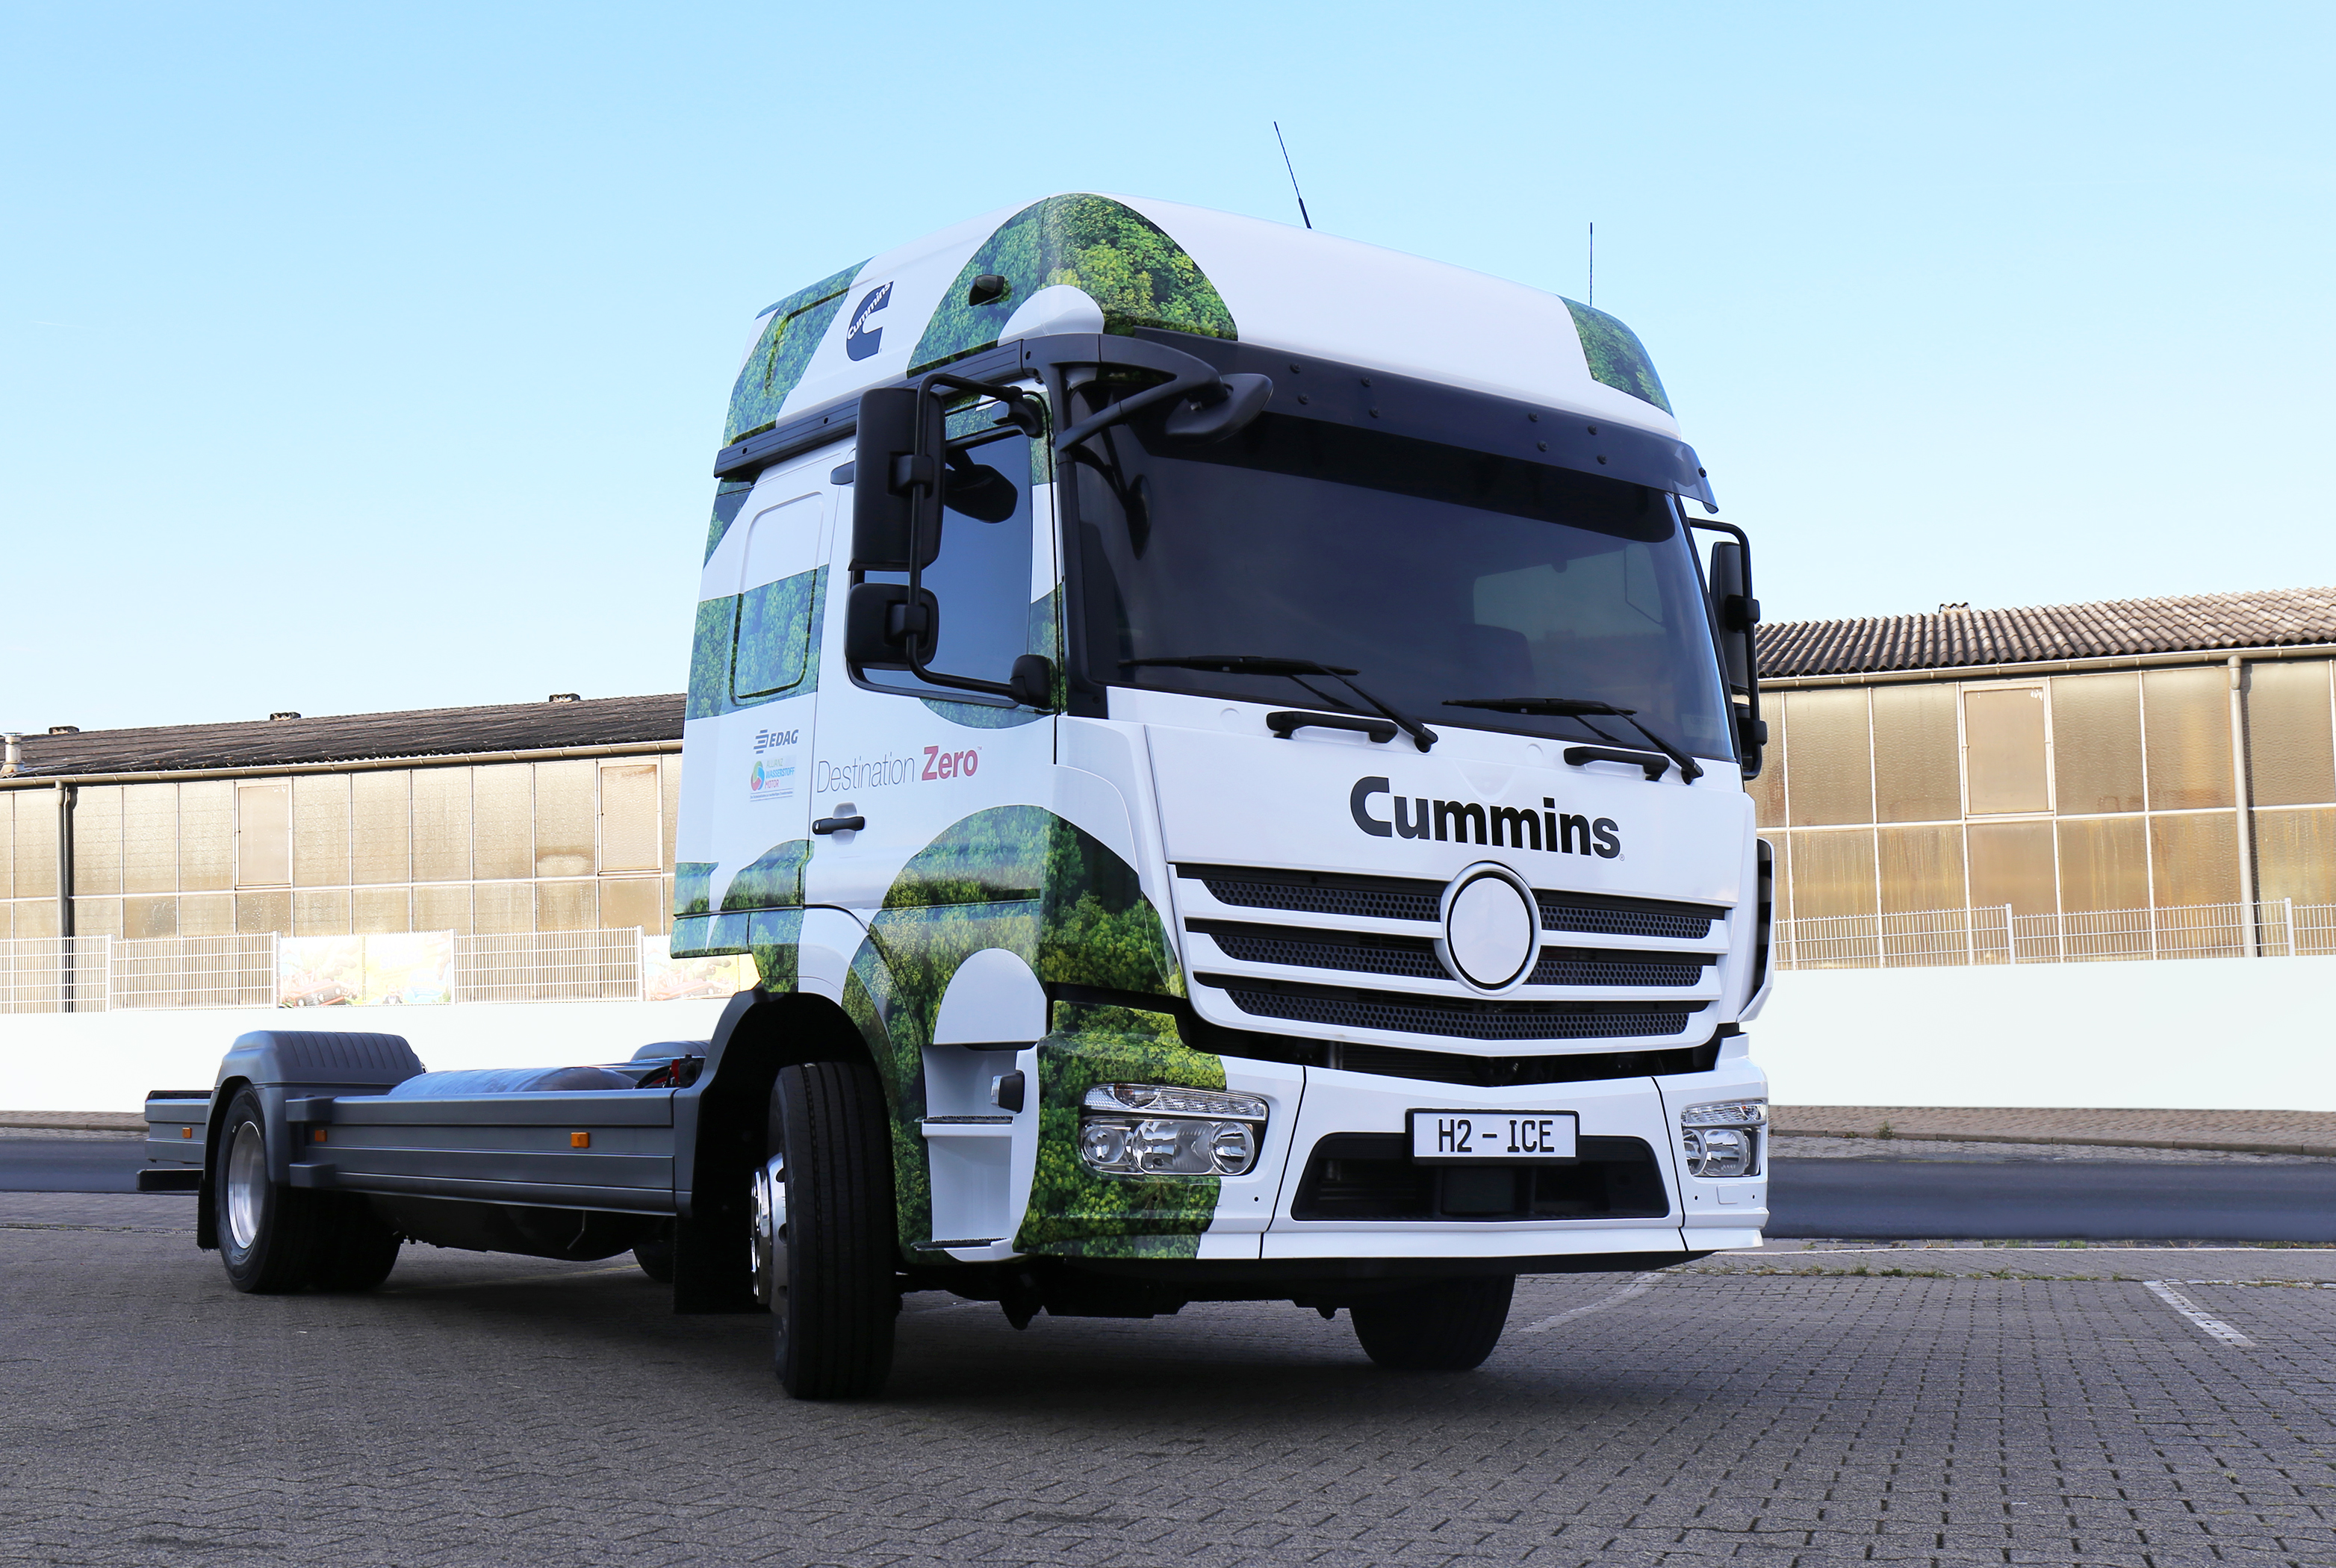 Cummins to Reveal Zero-Carbon H2-ICE Concept Truck at IAA Expo Powered by  the B6.7H Hydrogen Engine | Cummins Inc.